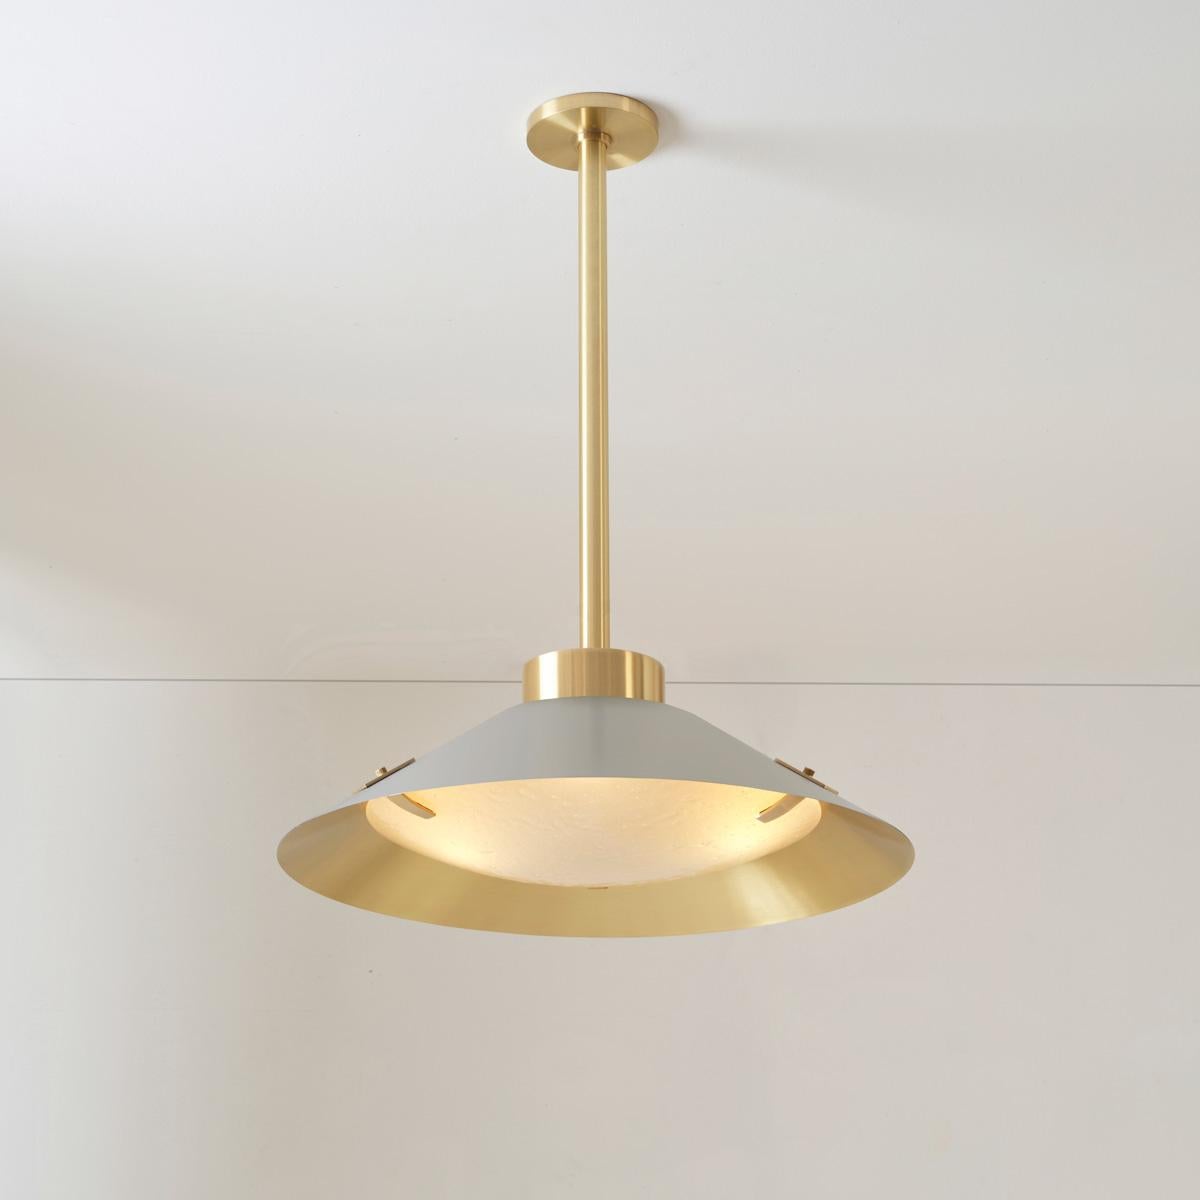 Kono Pendant by Gaspare Asaro. Satin Brass and Stone Grey For Sale 3